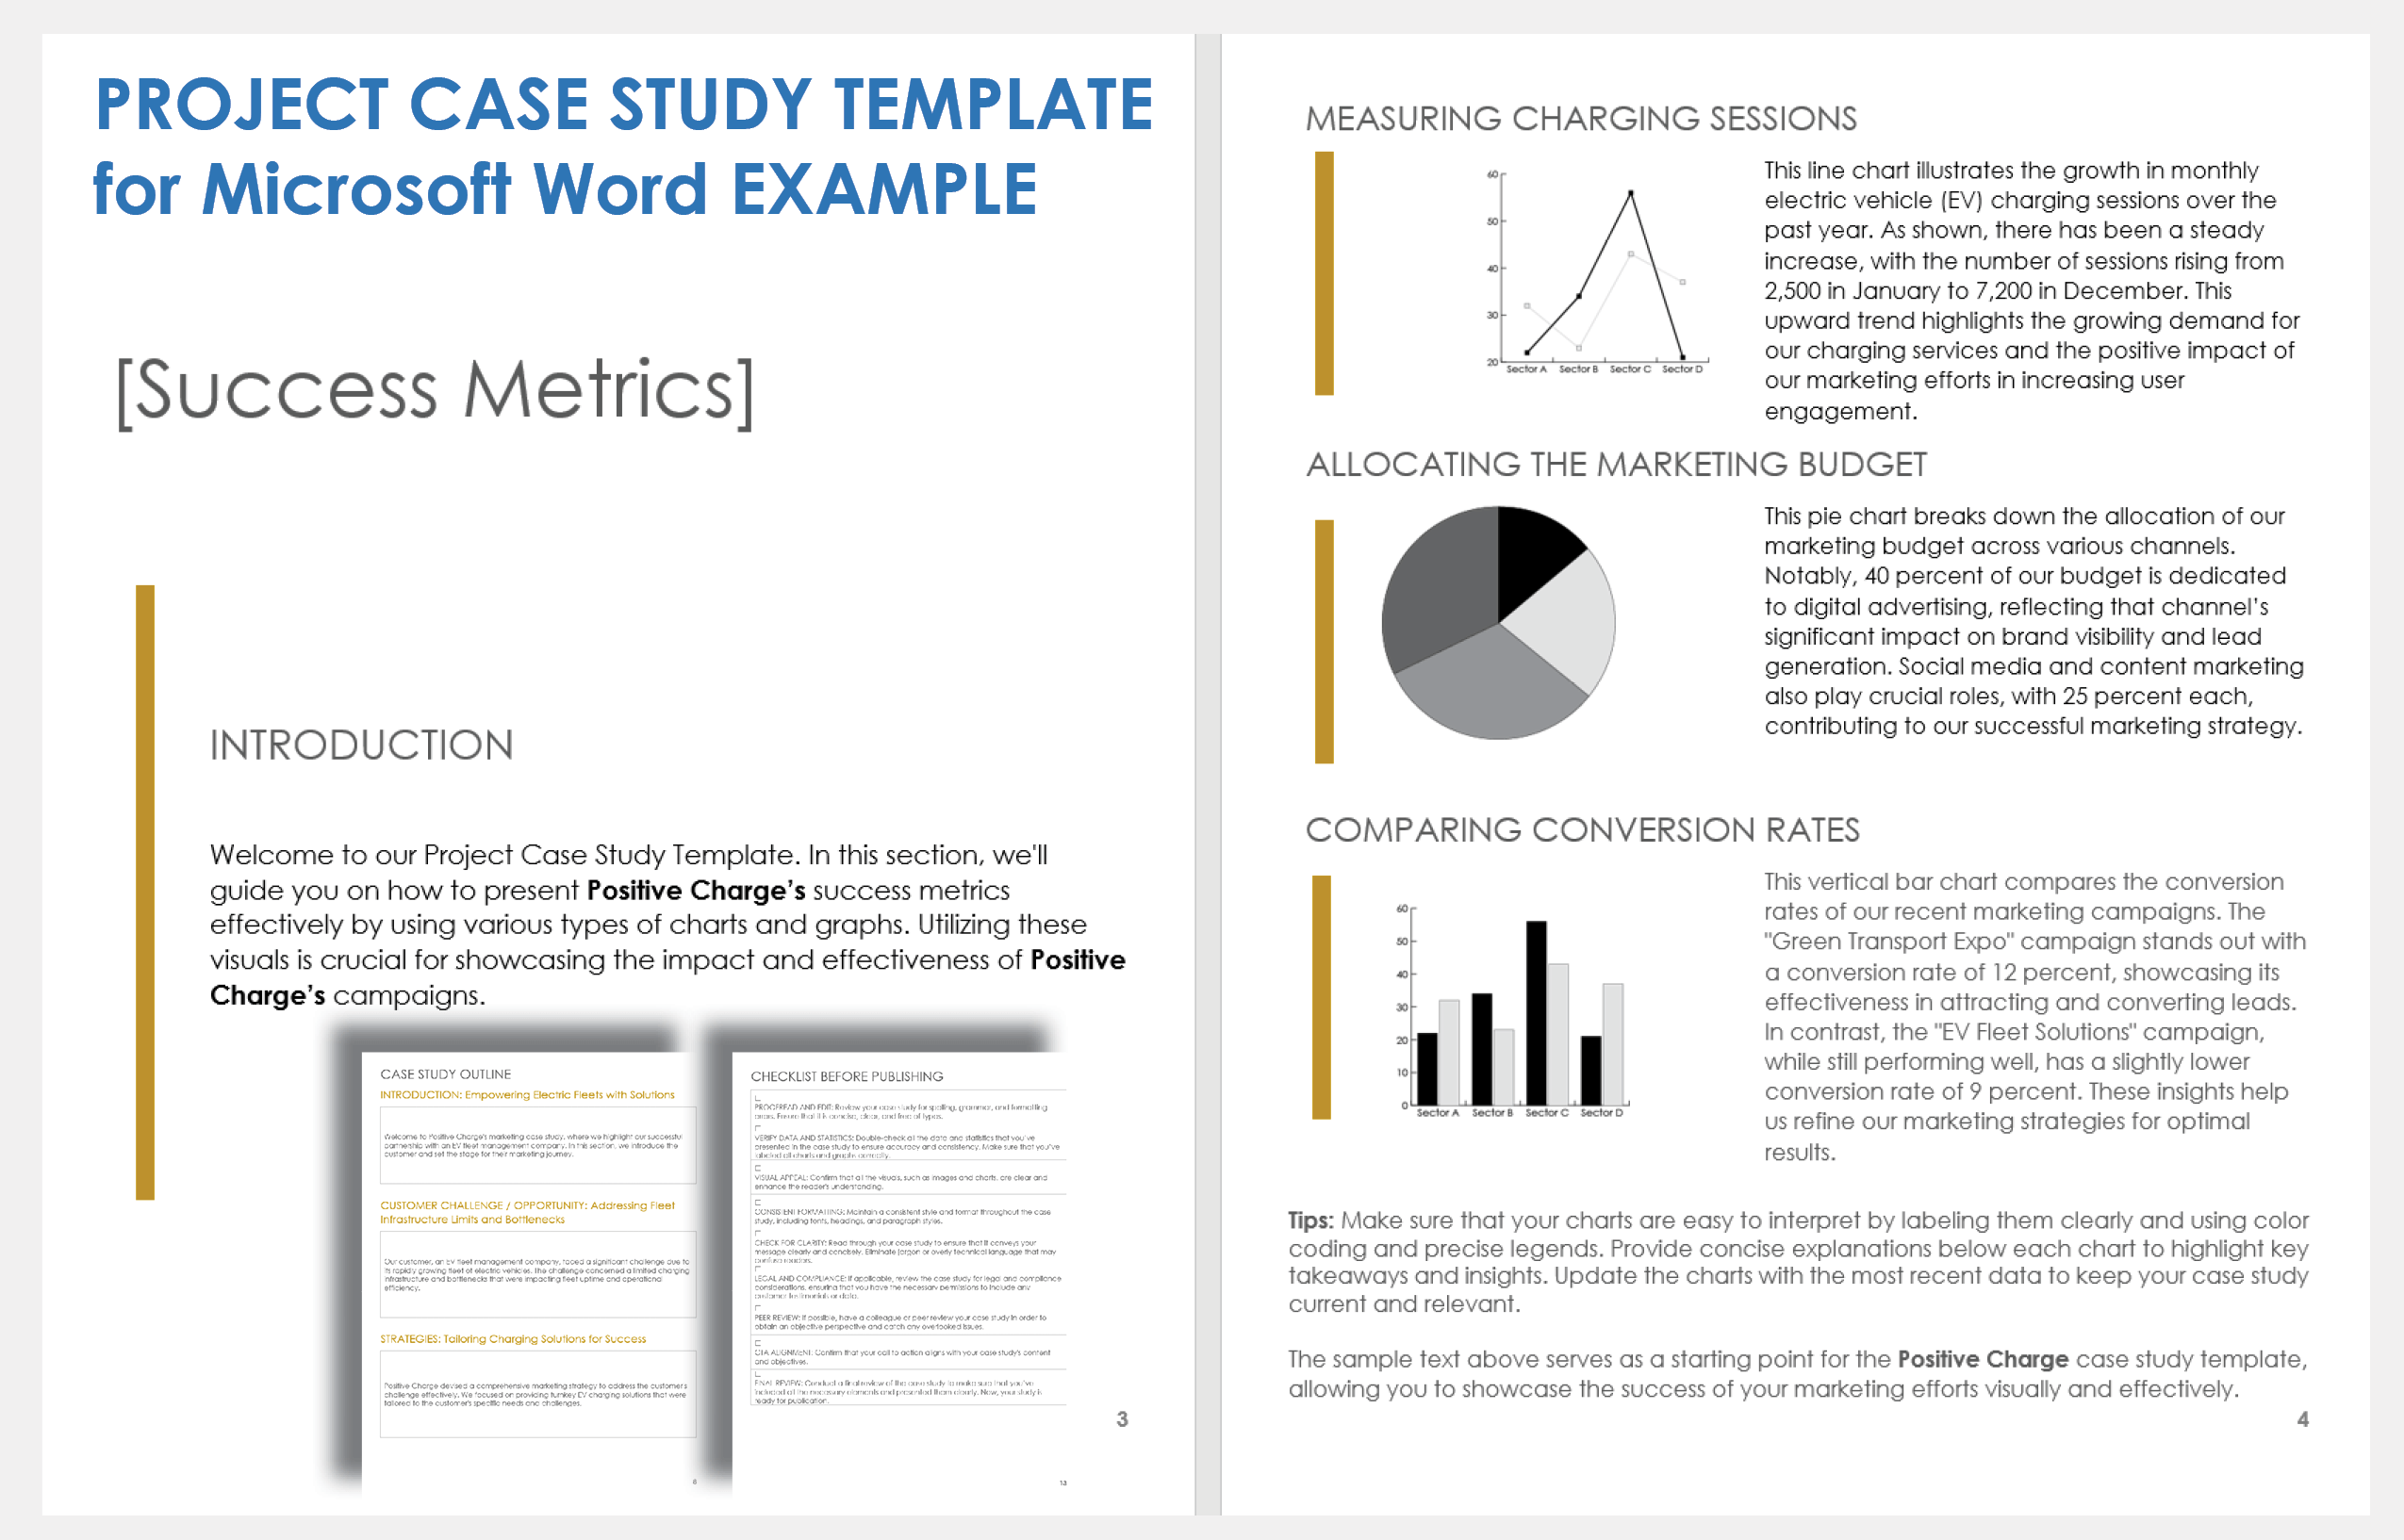 Project Case Study Template for Microsoft Word